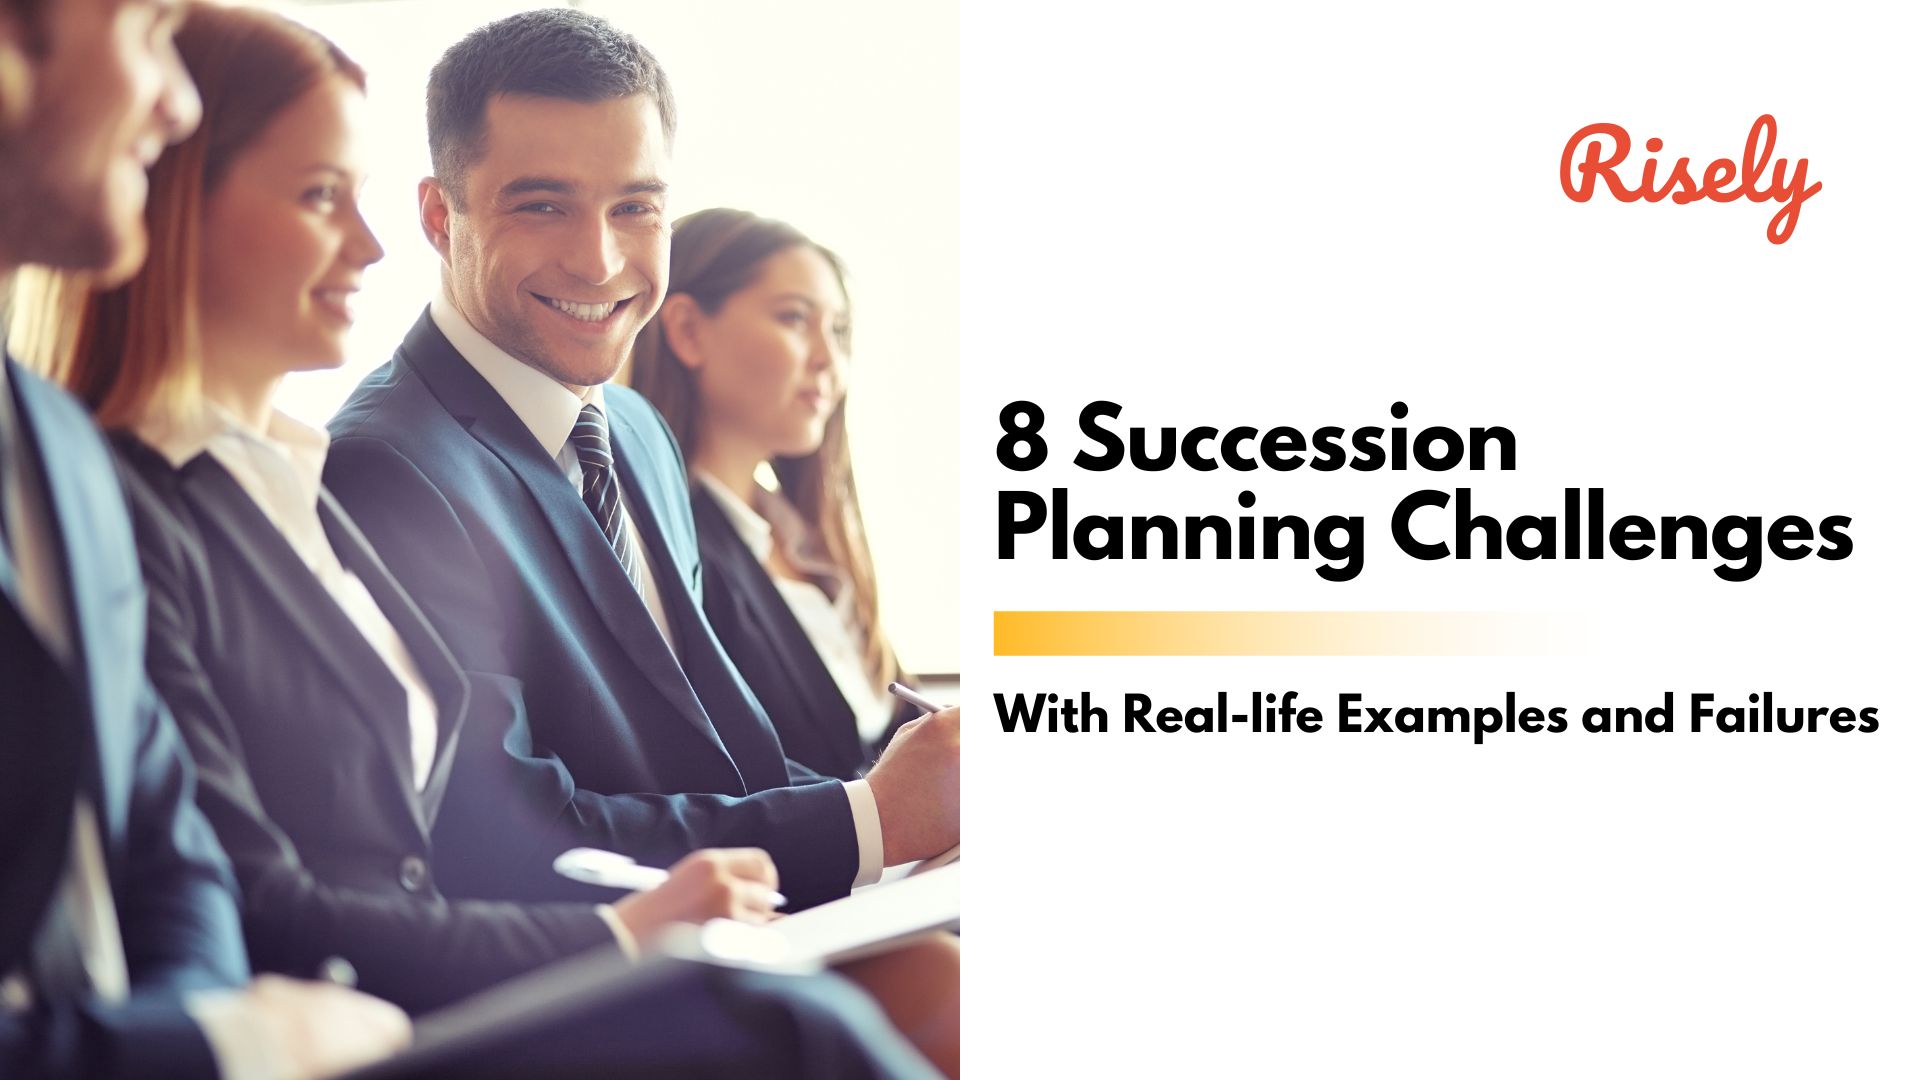 8 Succession Planning Challenges: With Real-life Examples and Failures